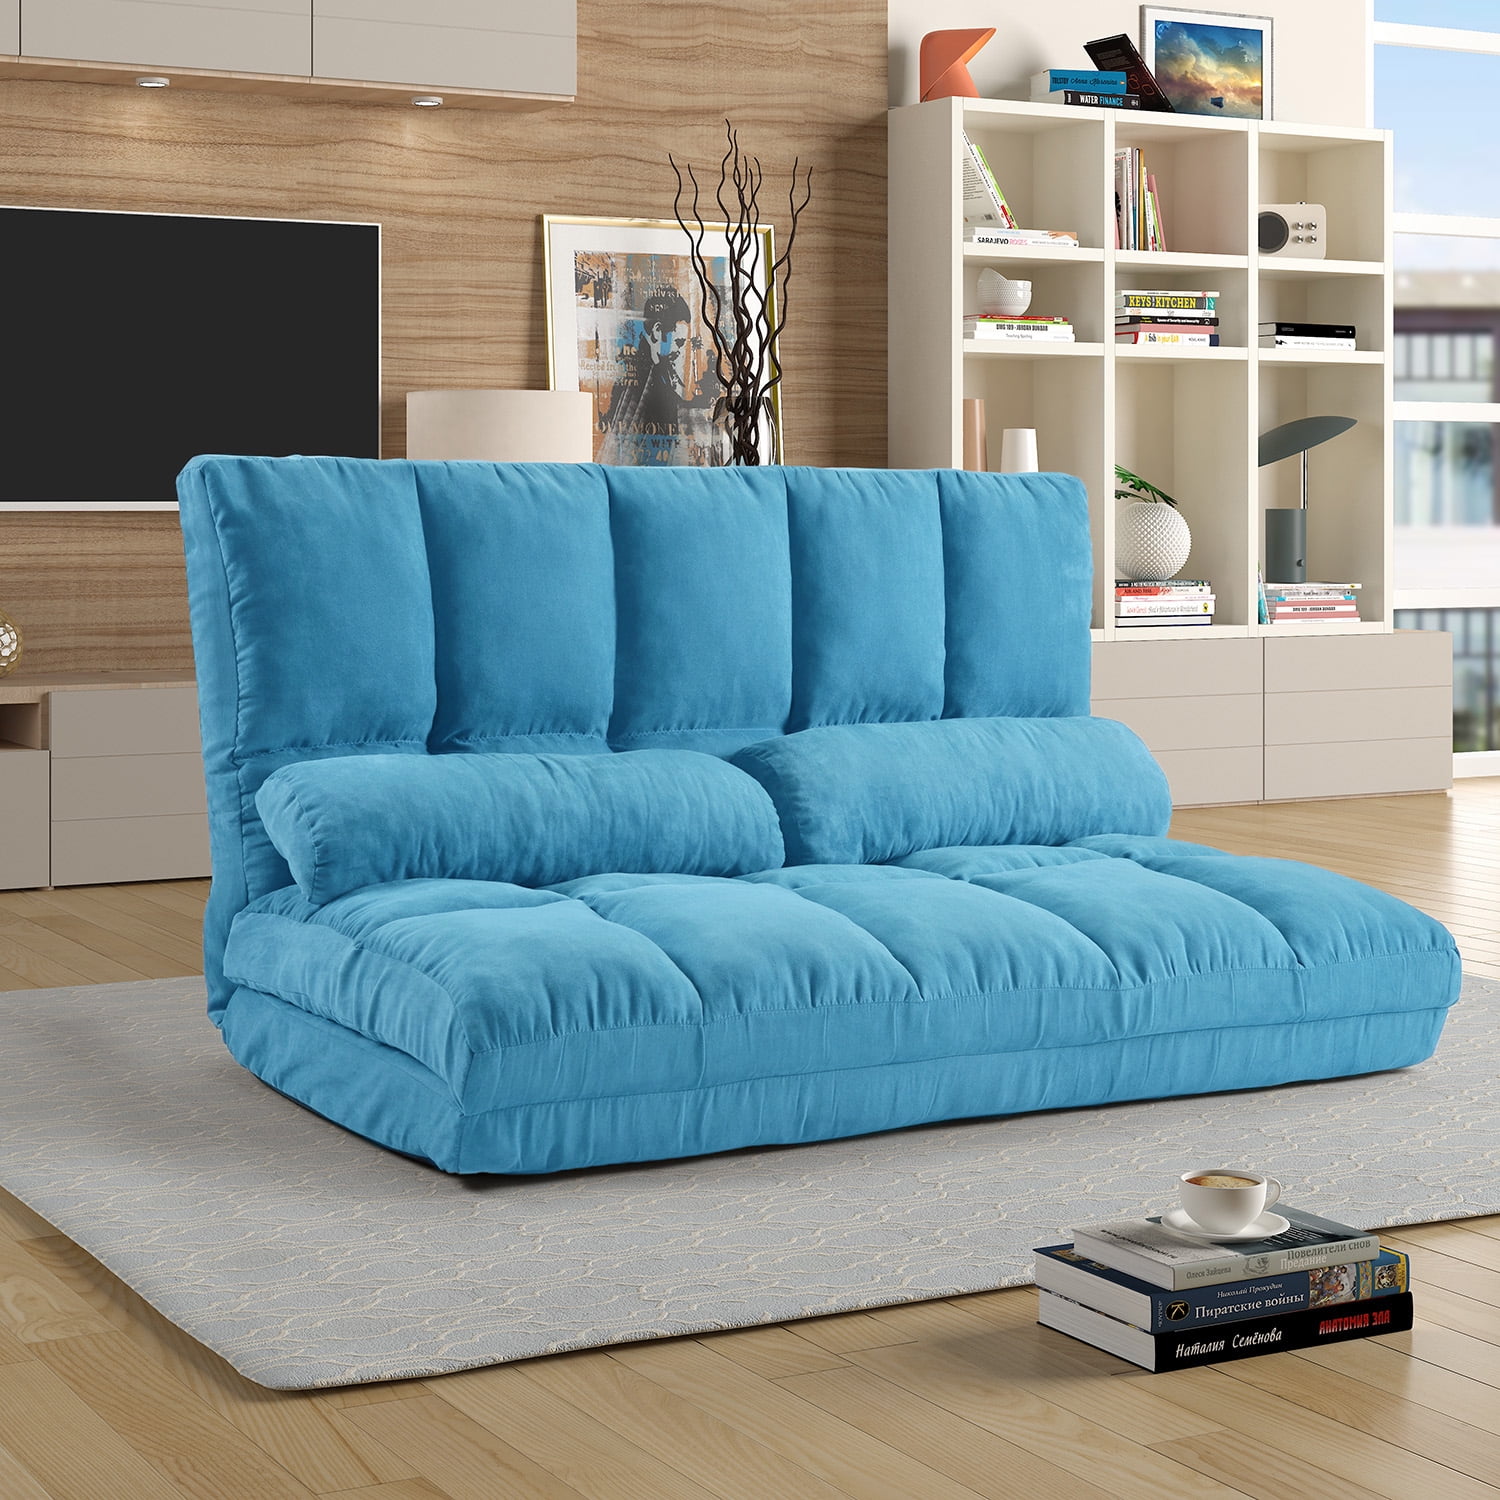 Double Chaise Lounge Sofa, Floor Sofa Bed Adjustable Bed Futon Bed Sofa Couches 5-Position Reclining Sofa Lazy Sofa Two Pillows Blue - Walmart.com